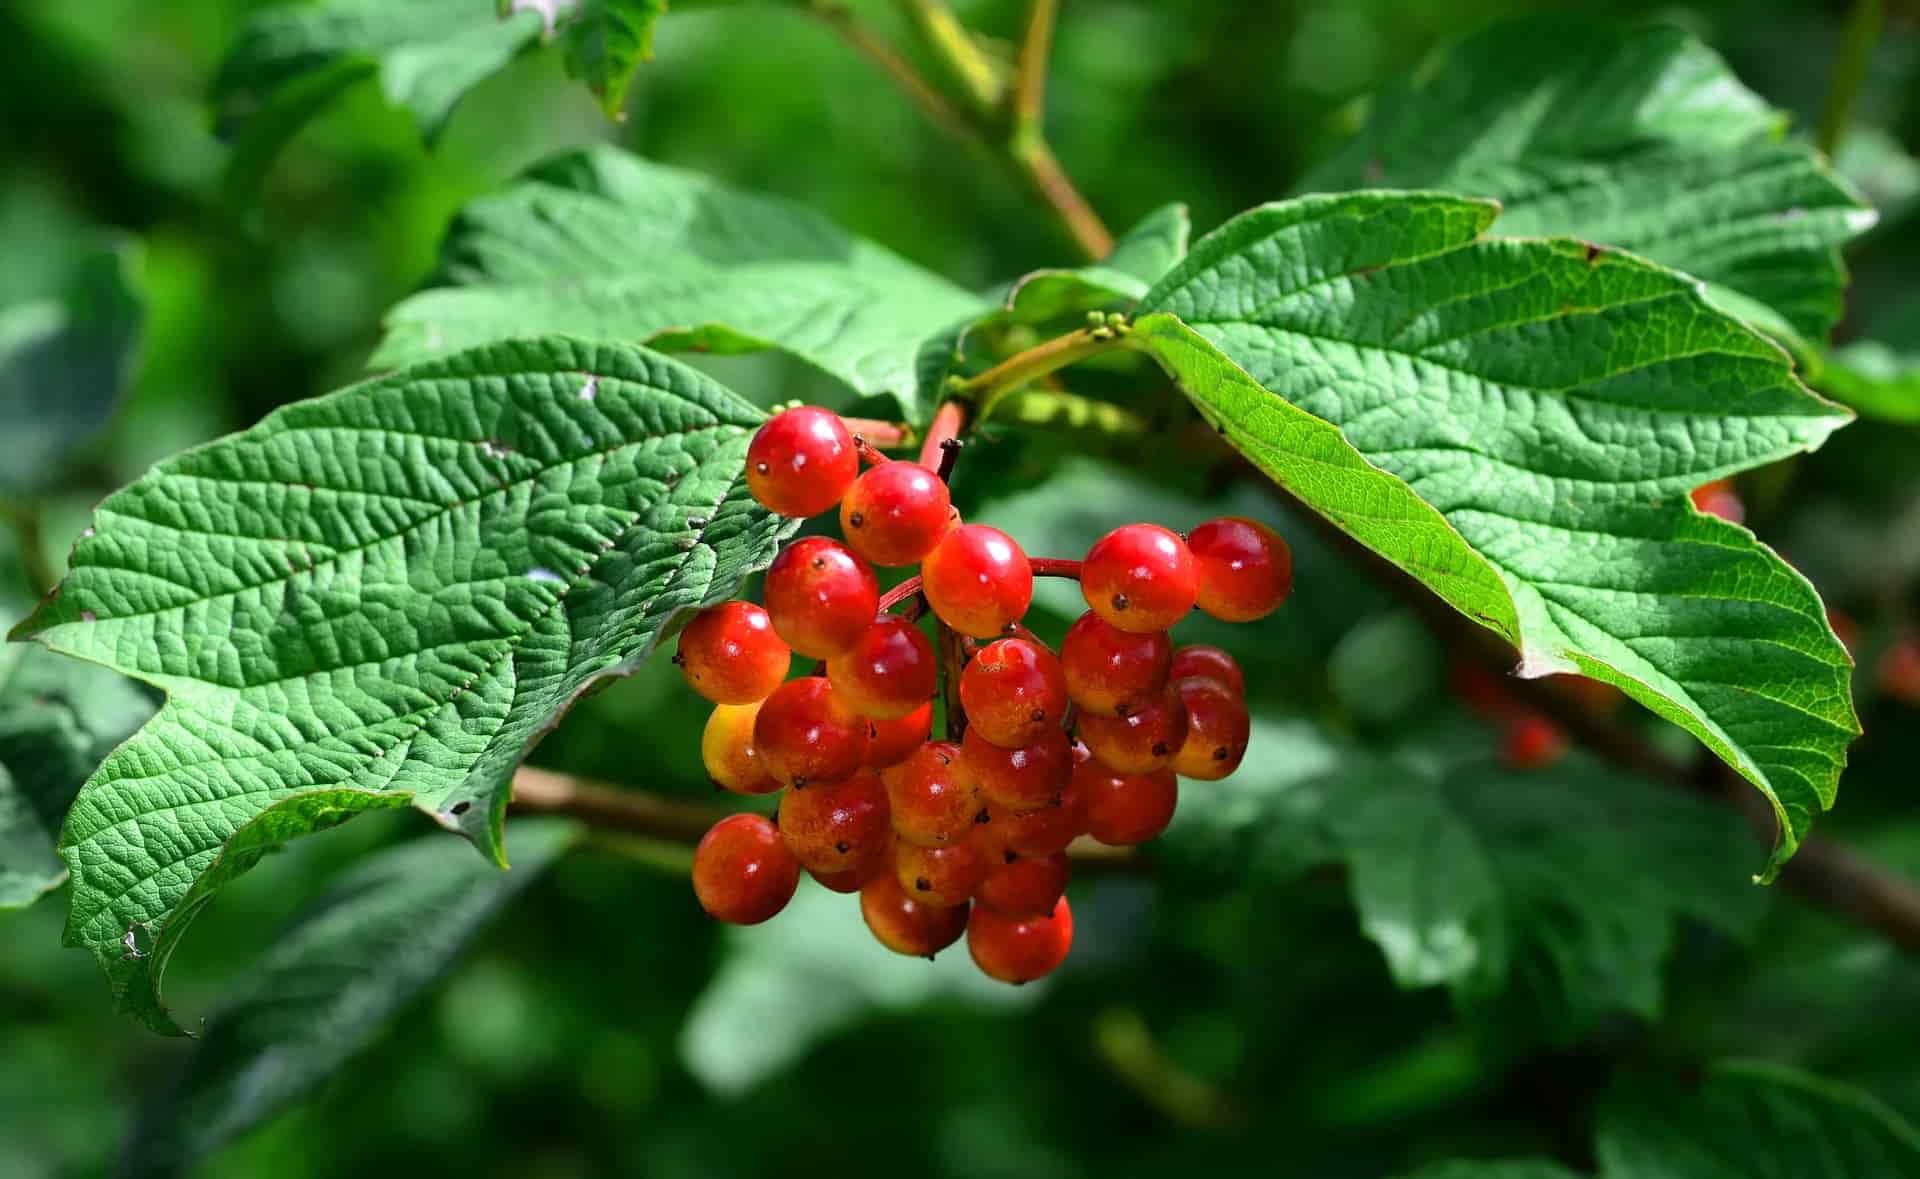 a tree with cranberry like fruit is utilised to make cramp bark extract